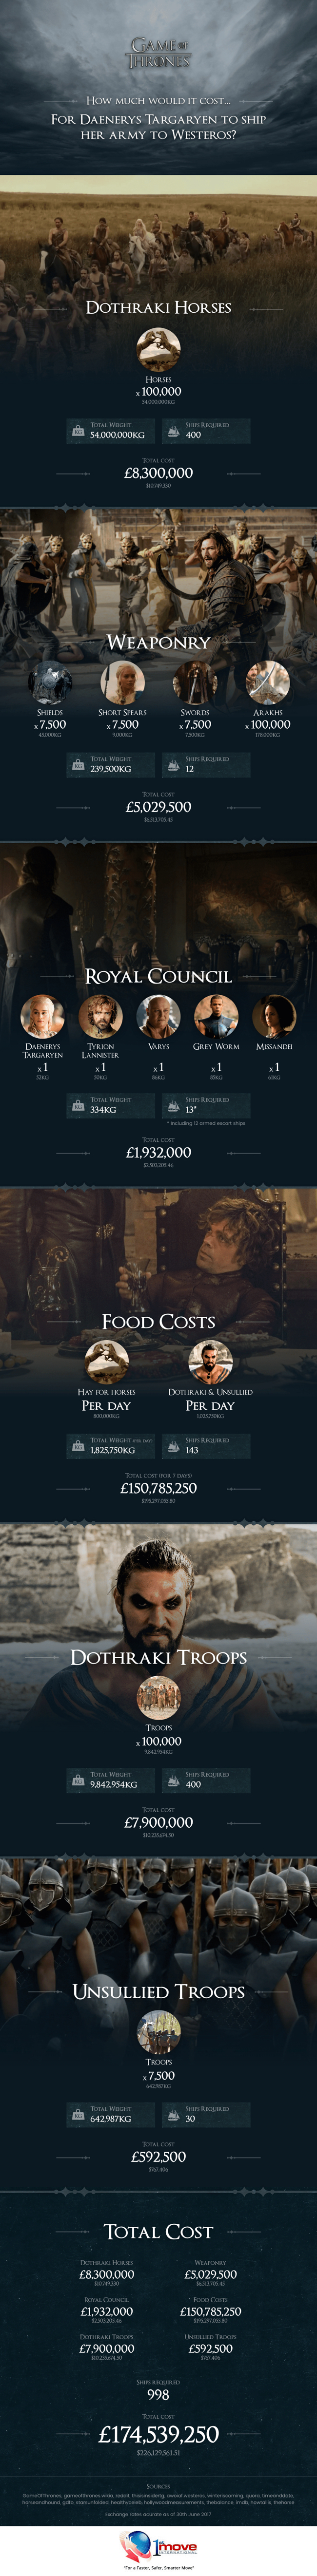 How Much Would it Cost to Ship Daenerys’ Army? infographic